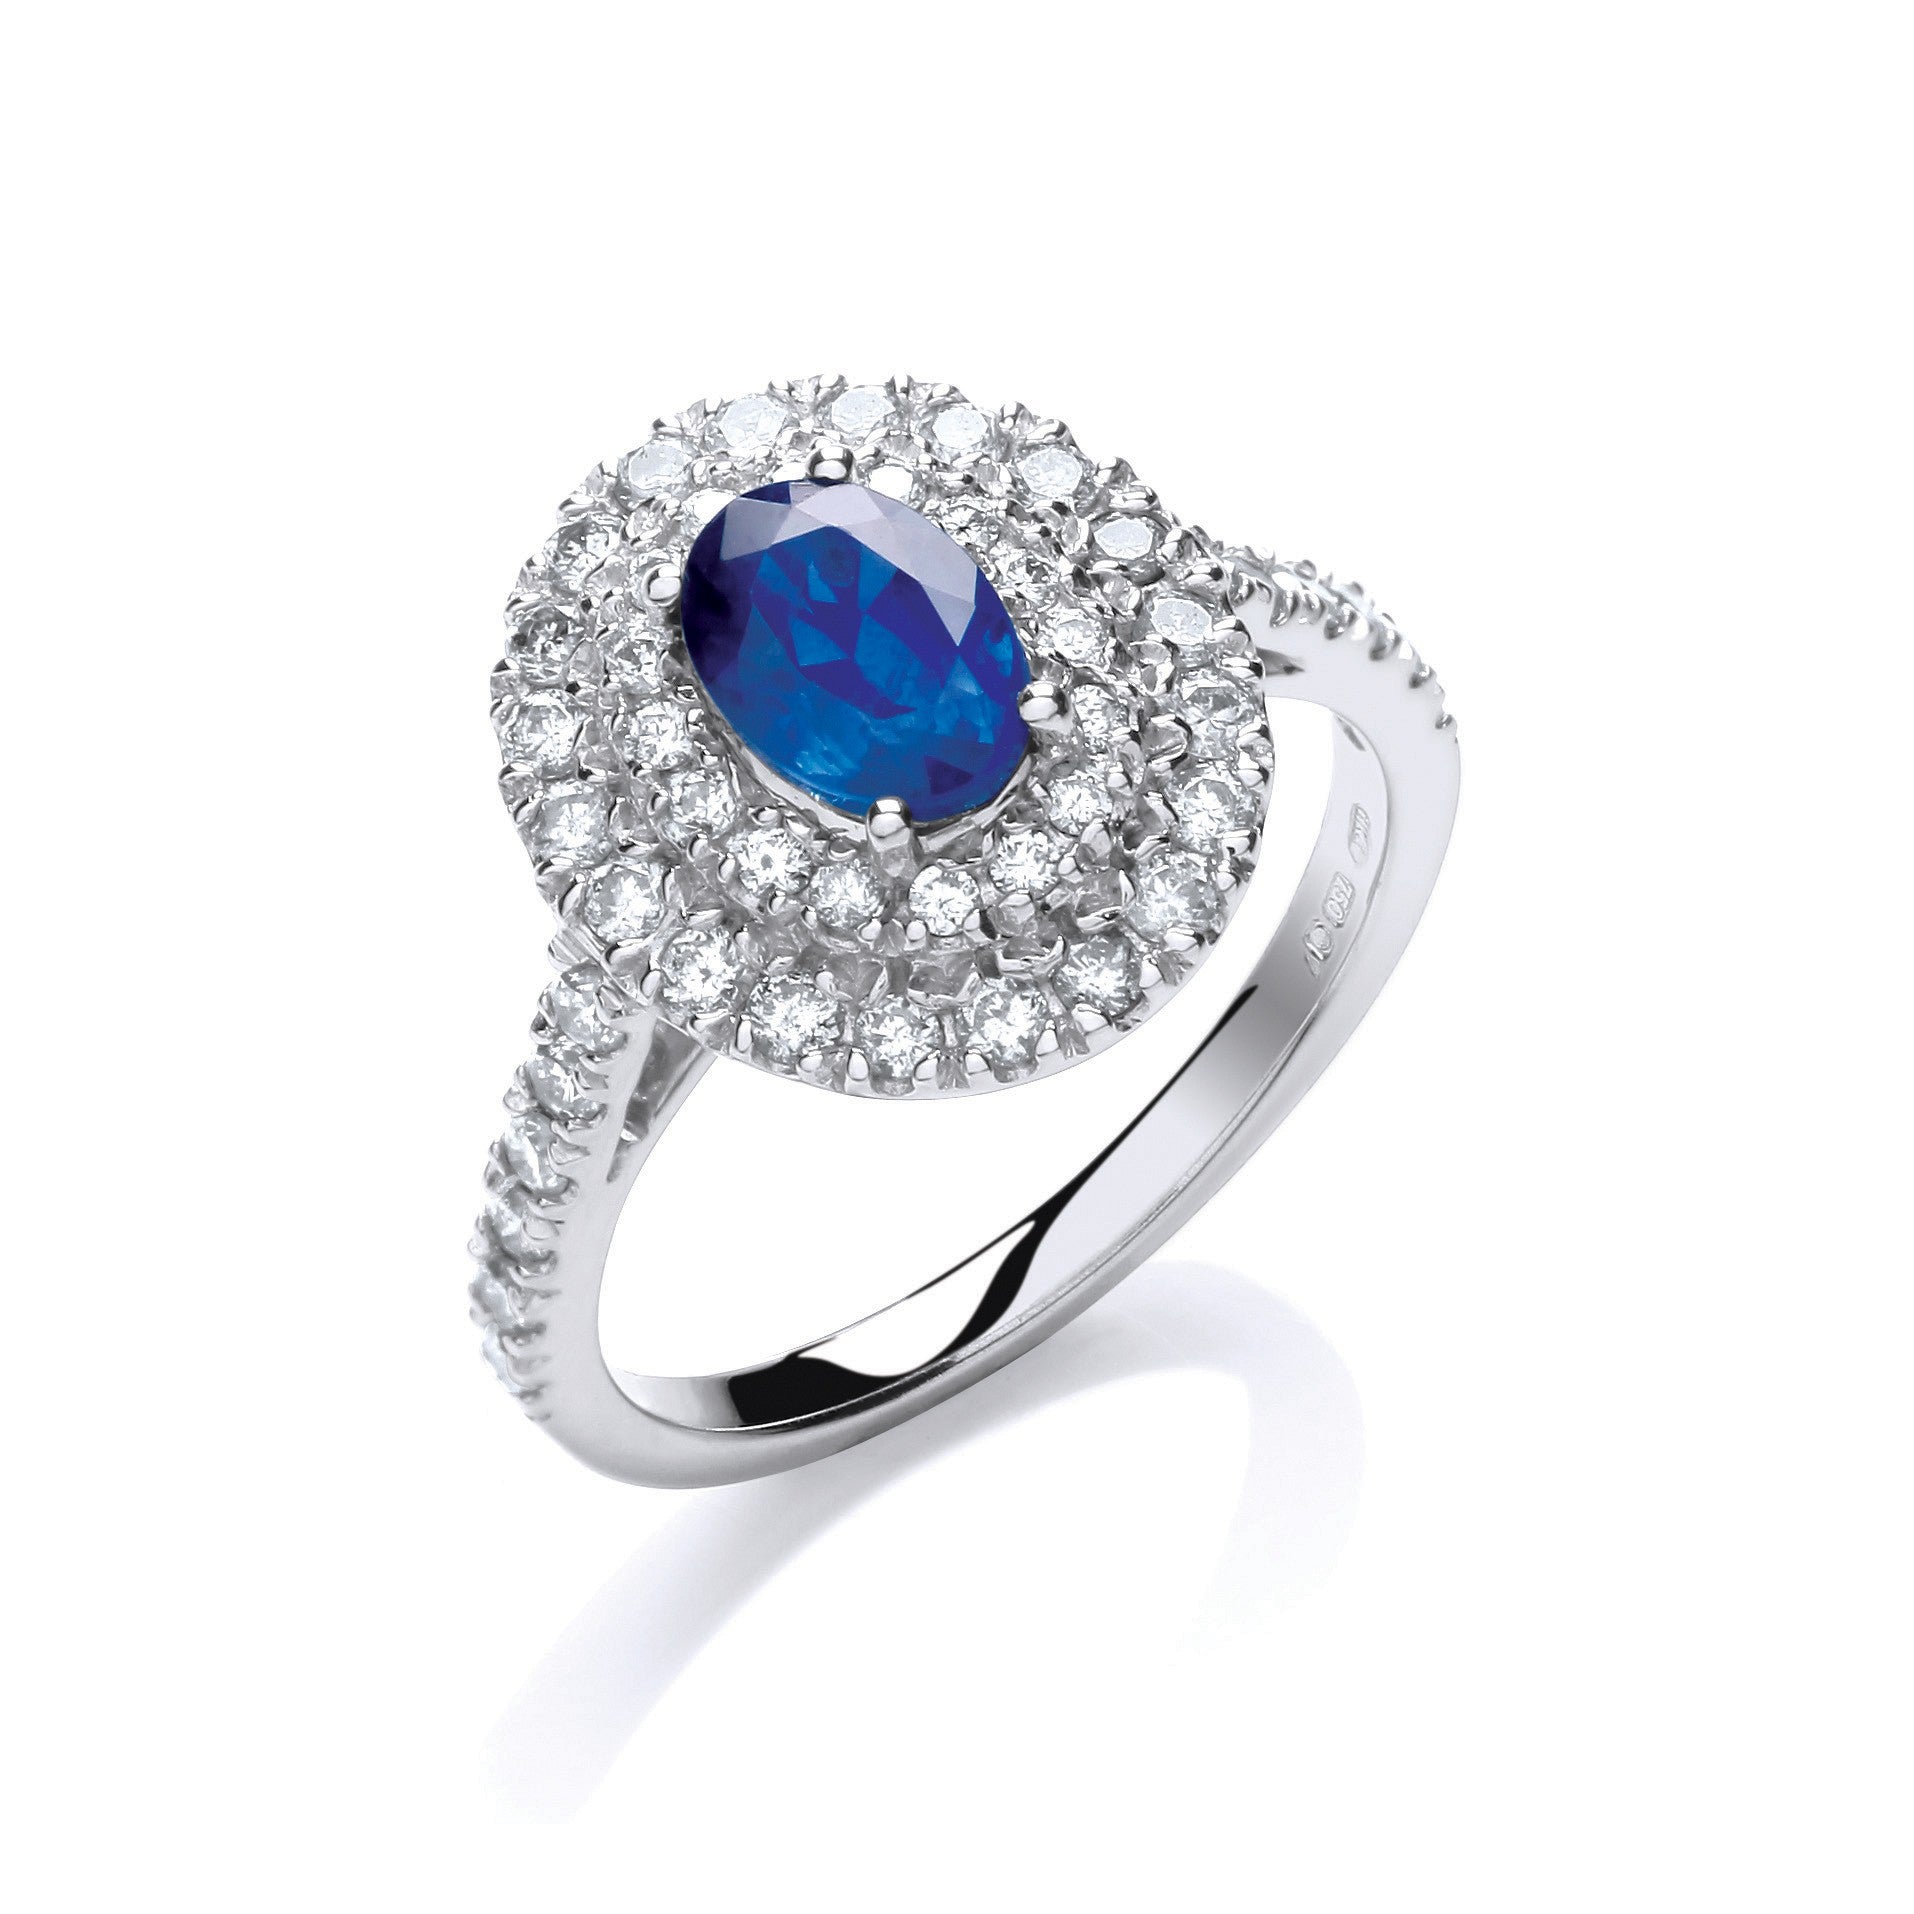 18ct W Gold Oval 1ct Sapphire Ring With .60ct of Diamonds - FJewellery